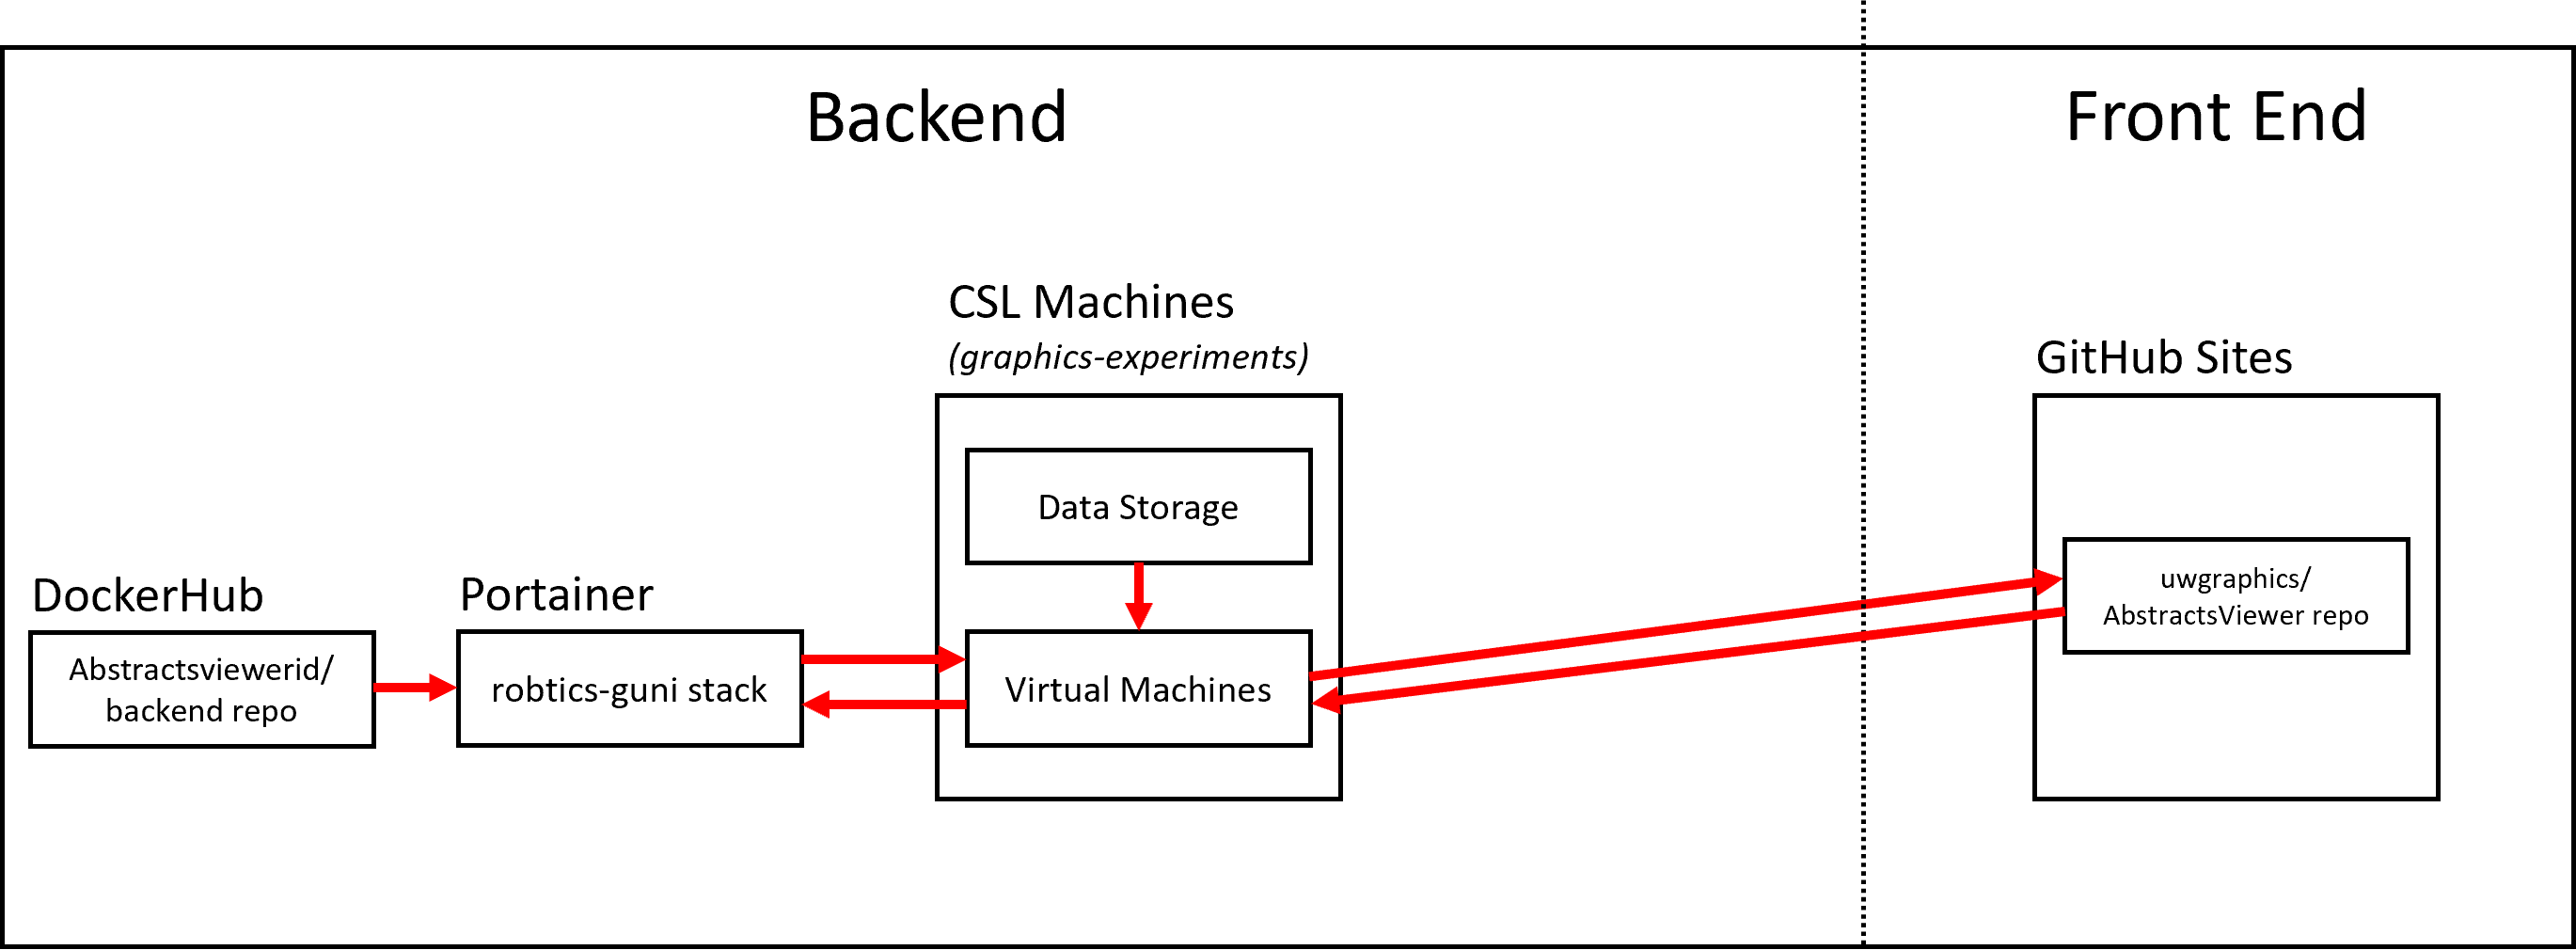 System Architecture